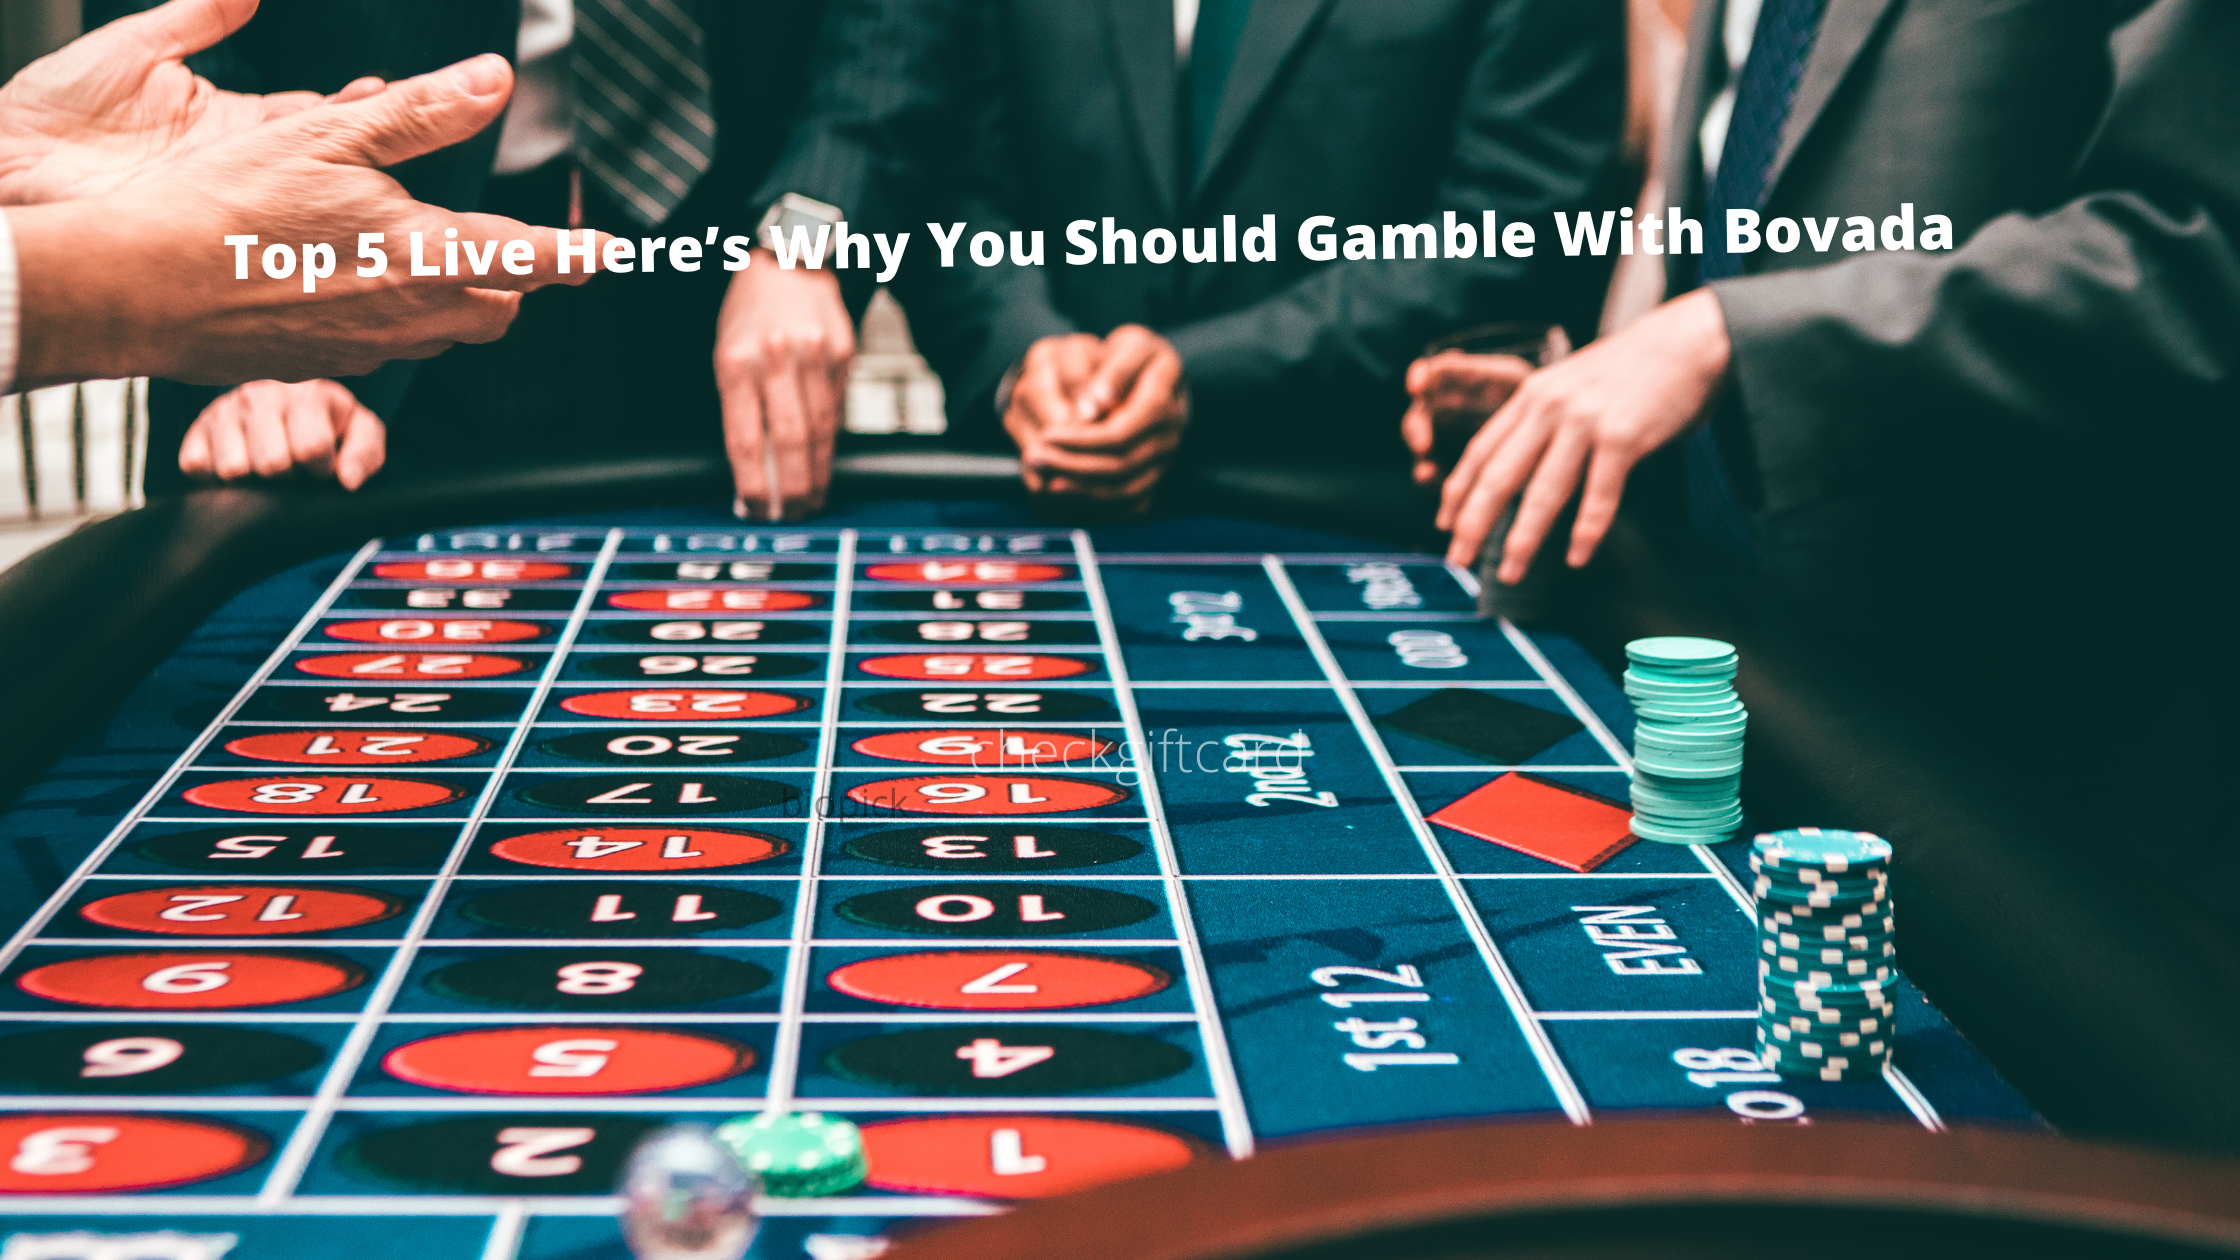 Here’s Why You Should Gamble With Bovada